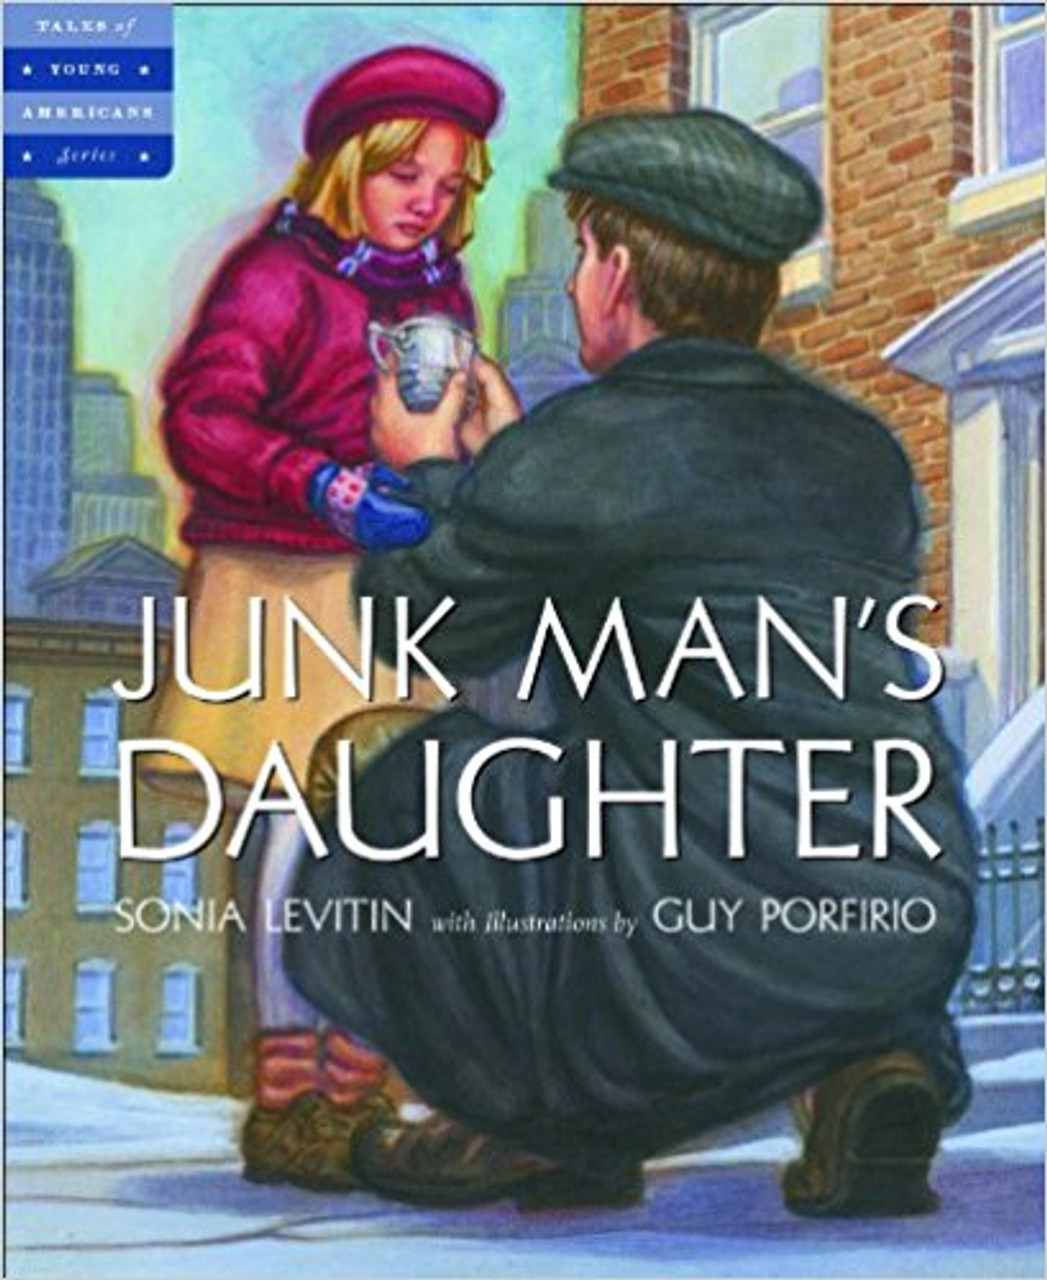 Junk Man's Daughter by Sonia Levitin